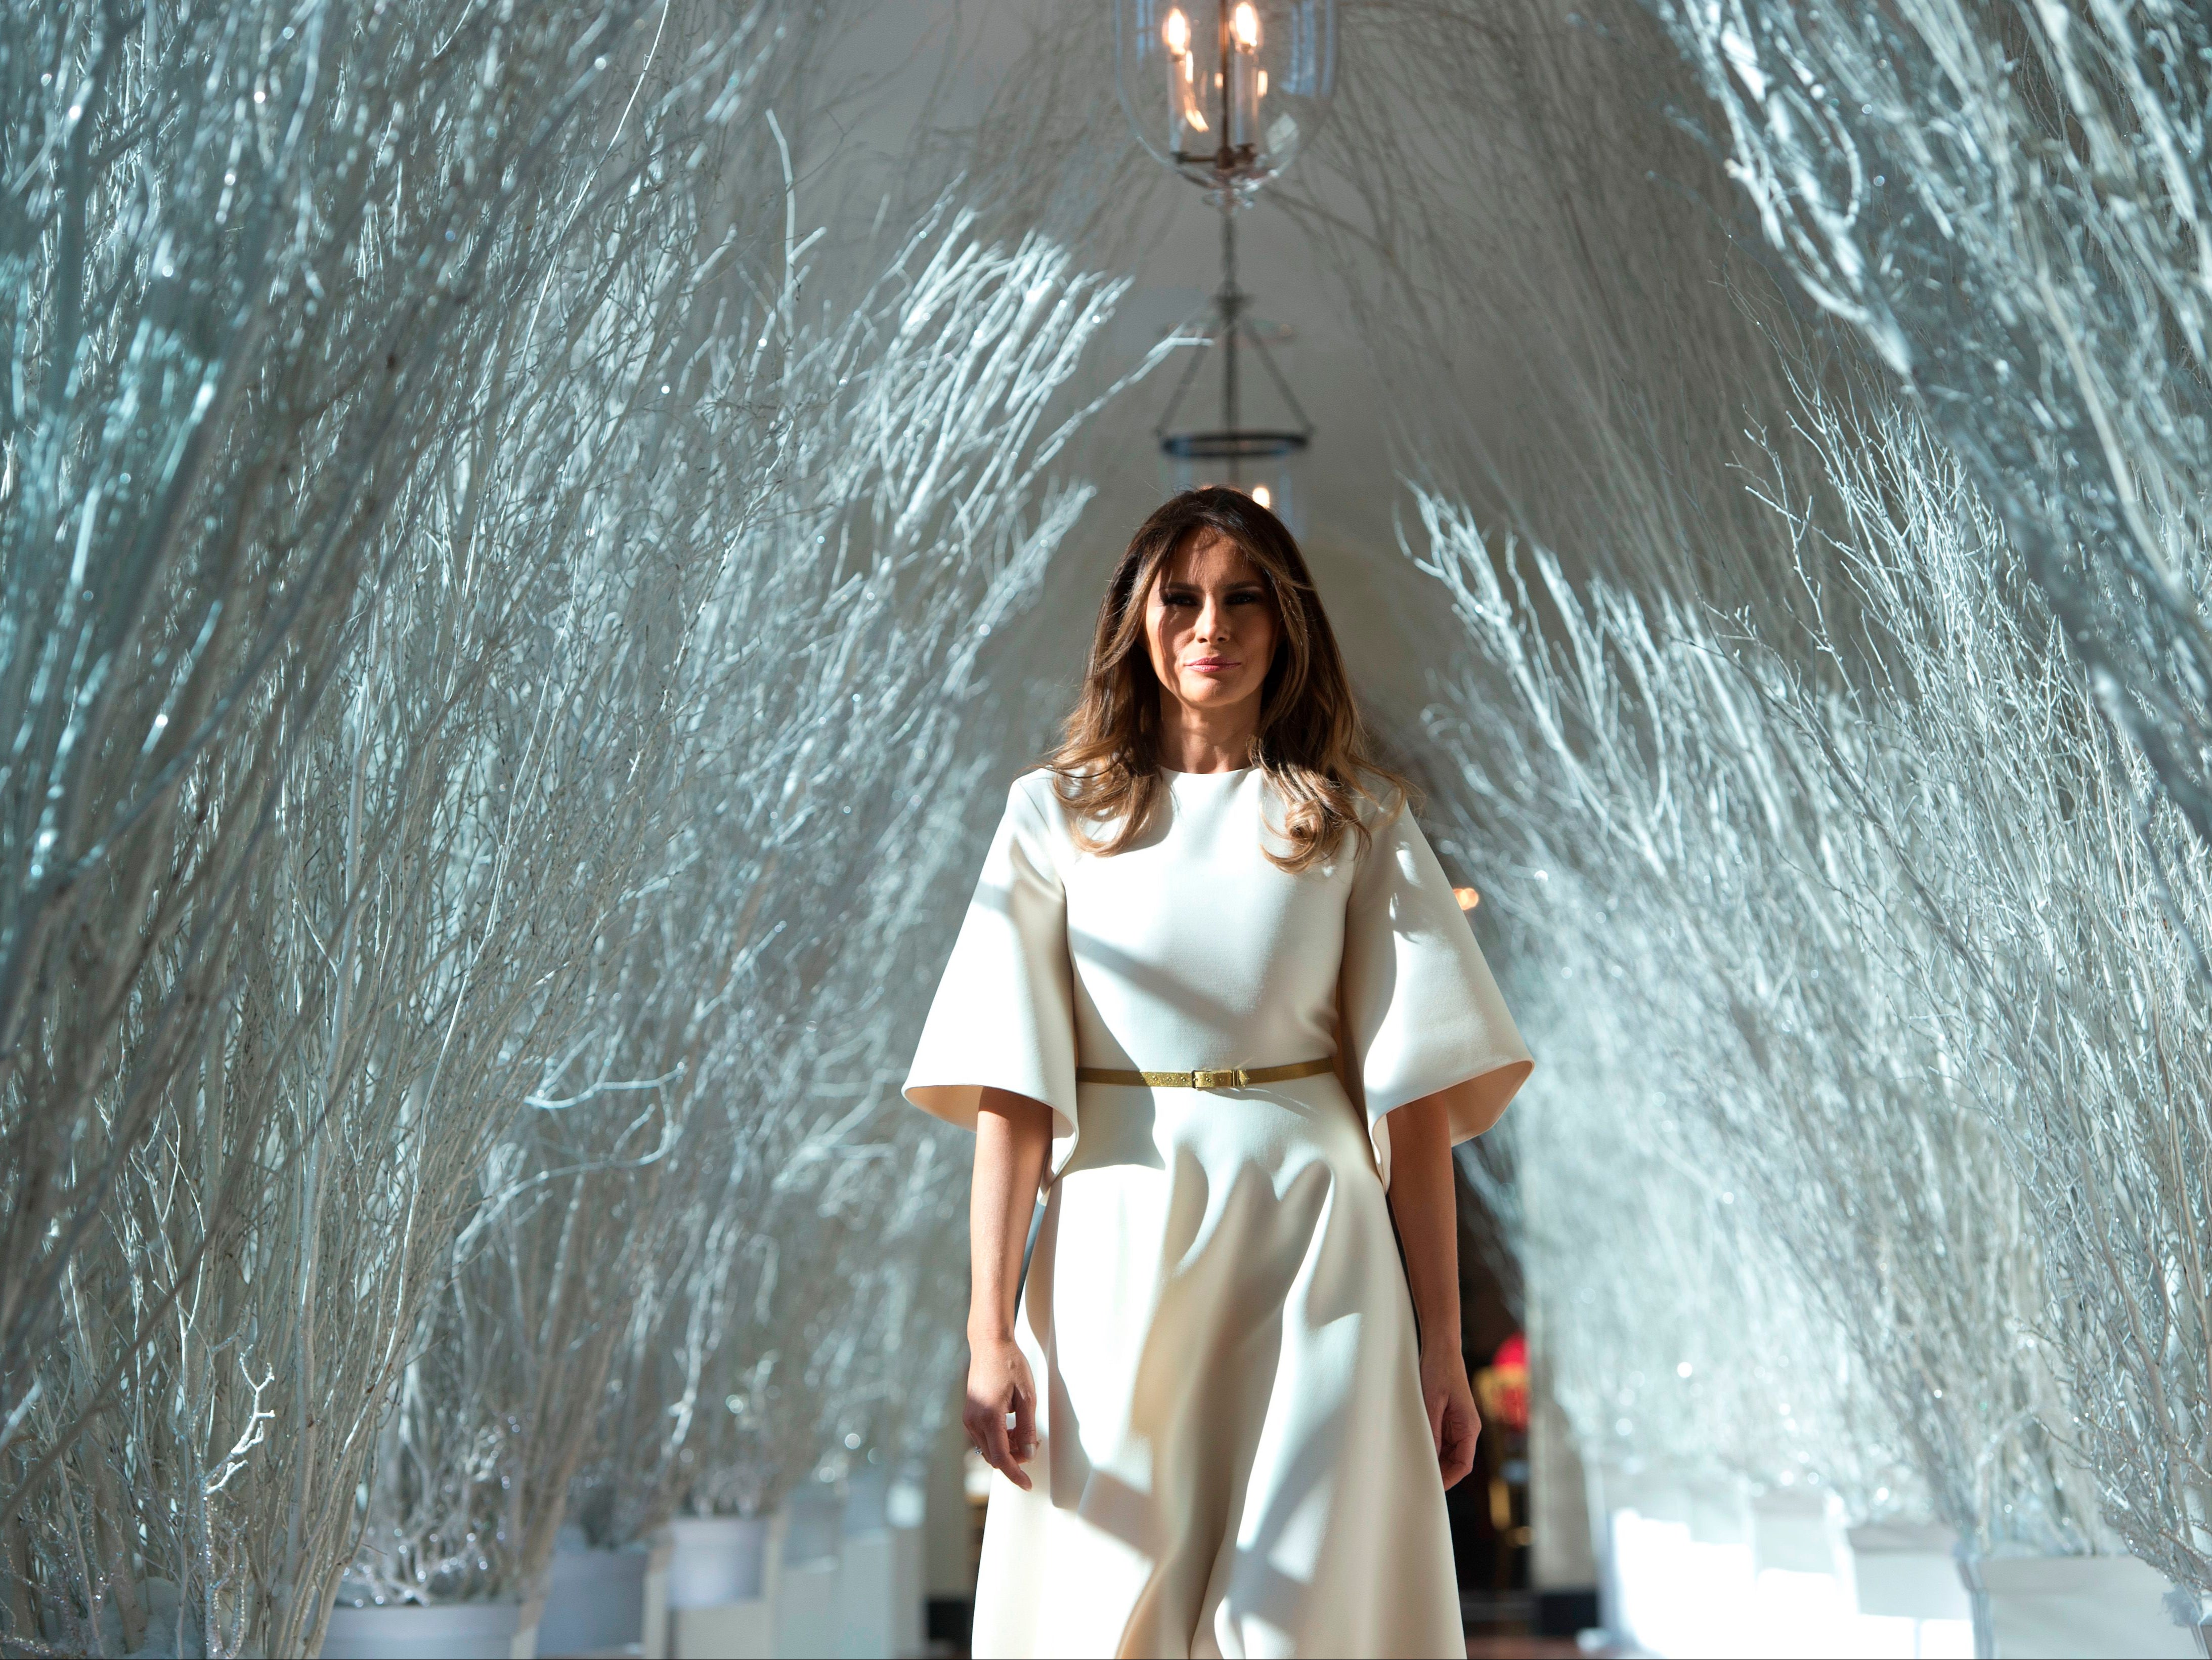 First Lady Melania Trump walks through Christmas decorations in the East Wing, 27 November 2017